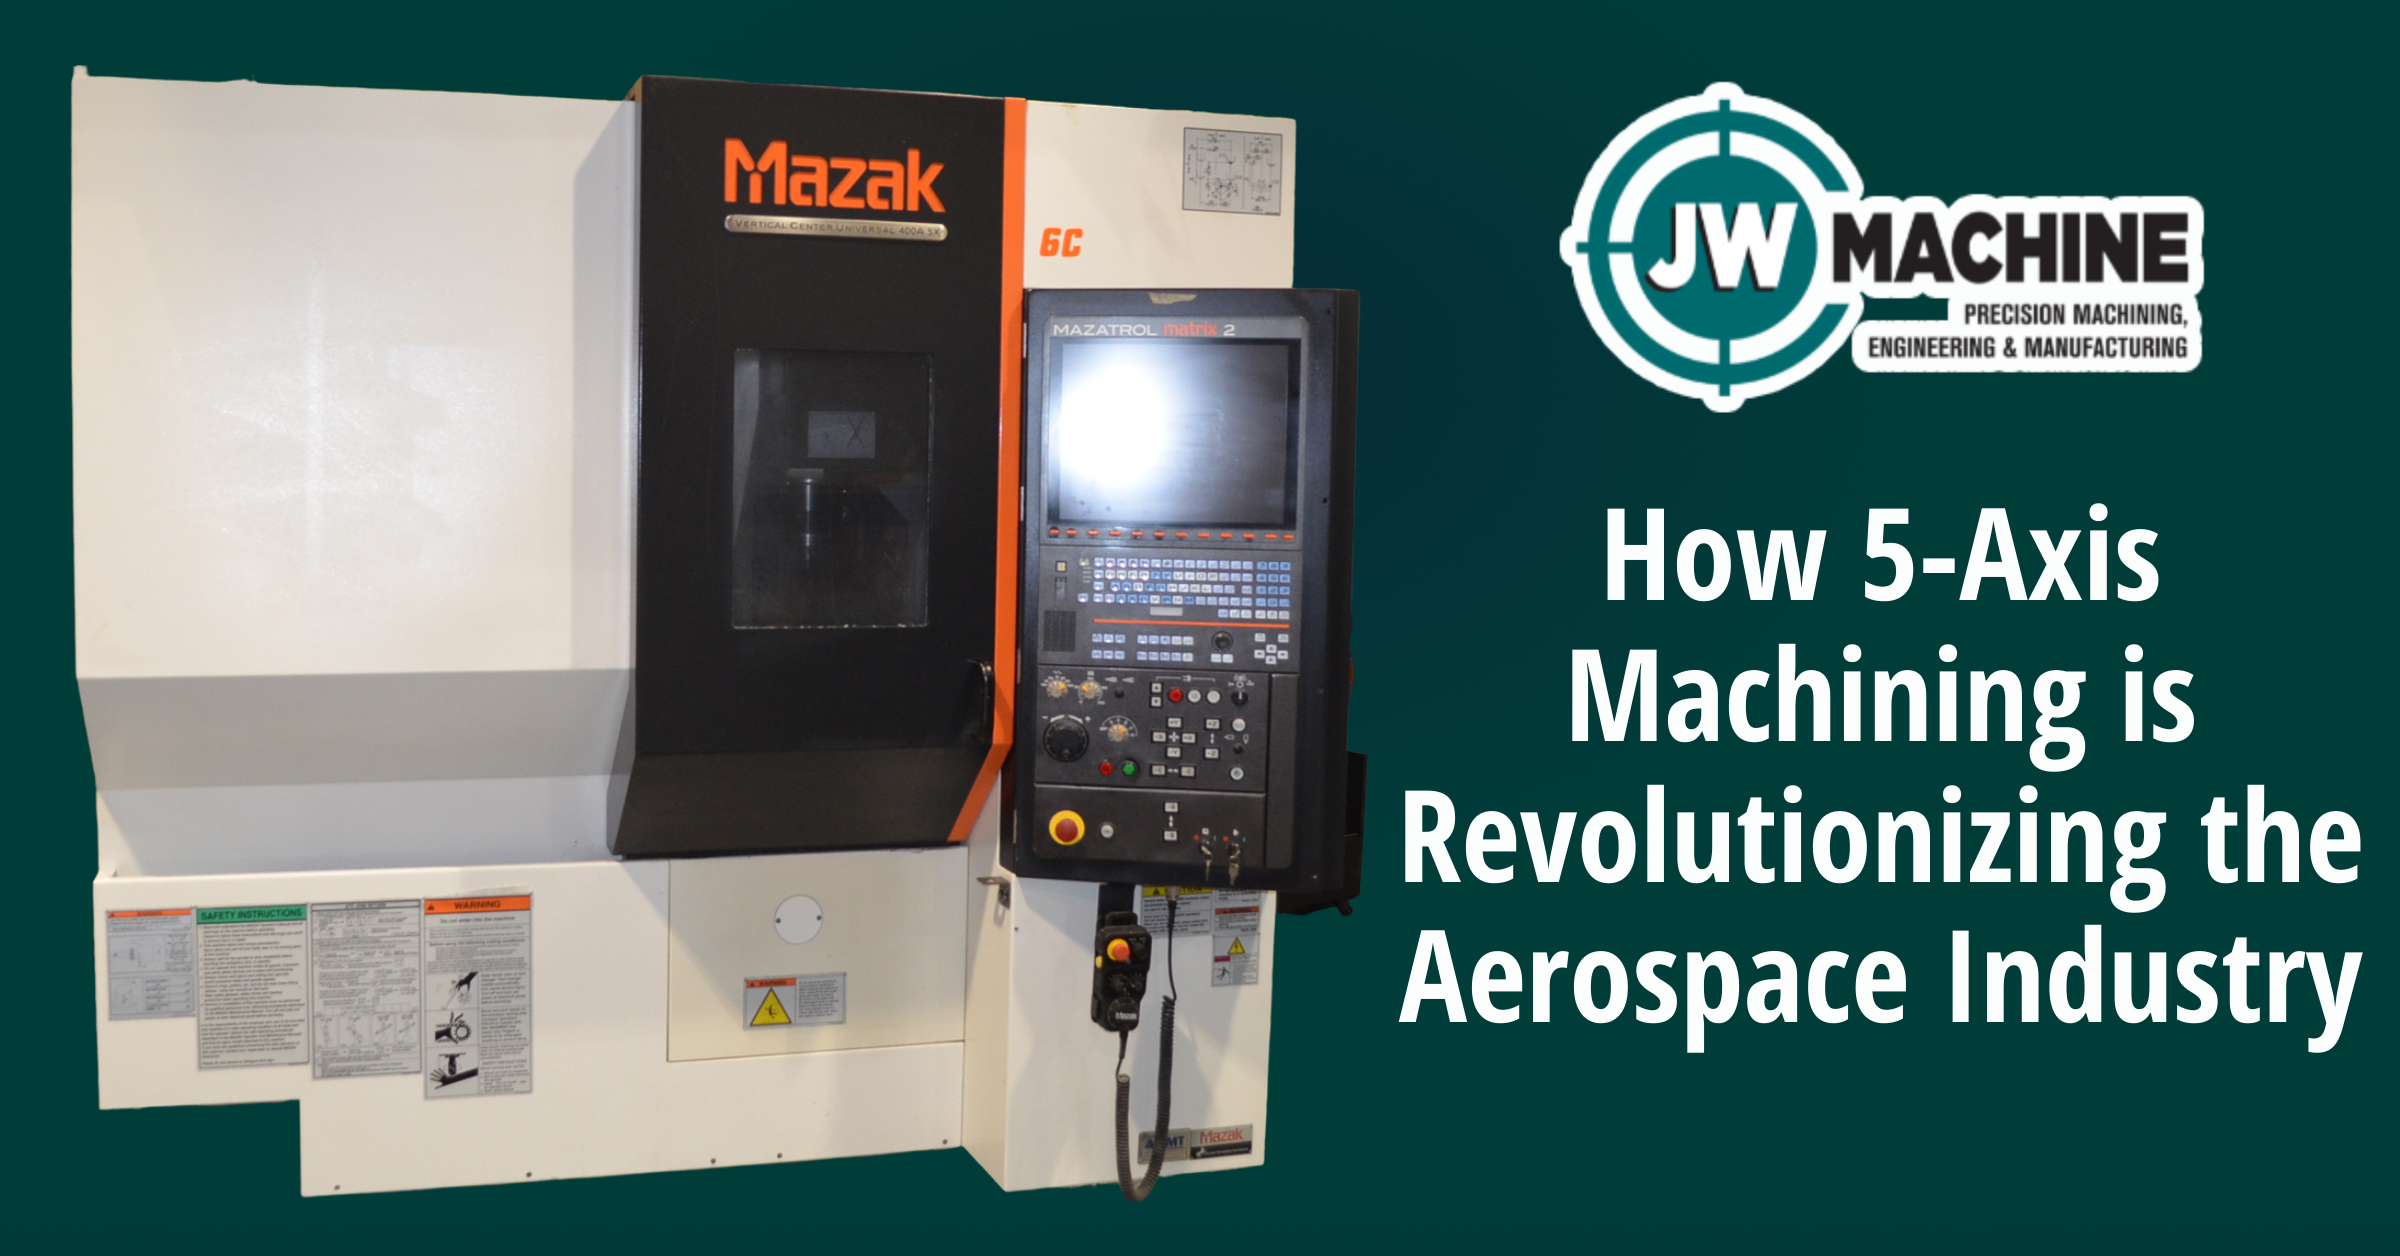 How 5-Axis Machining is Revolutionizing the Aerospace Industry